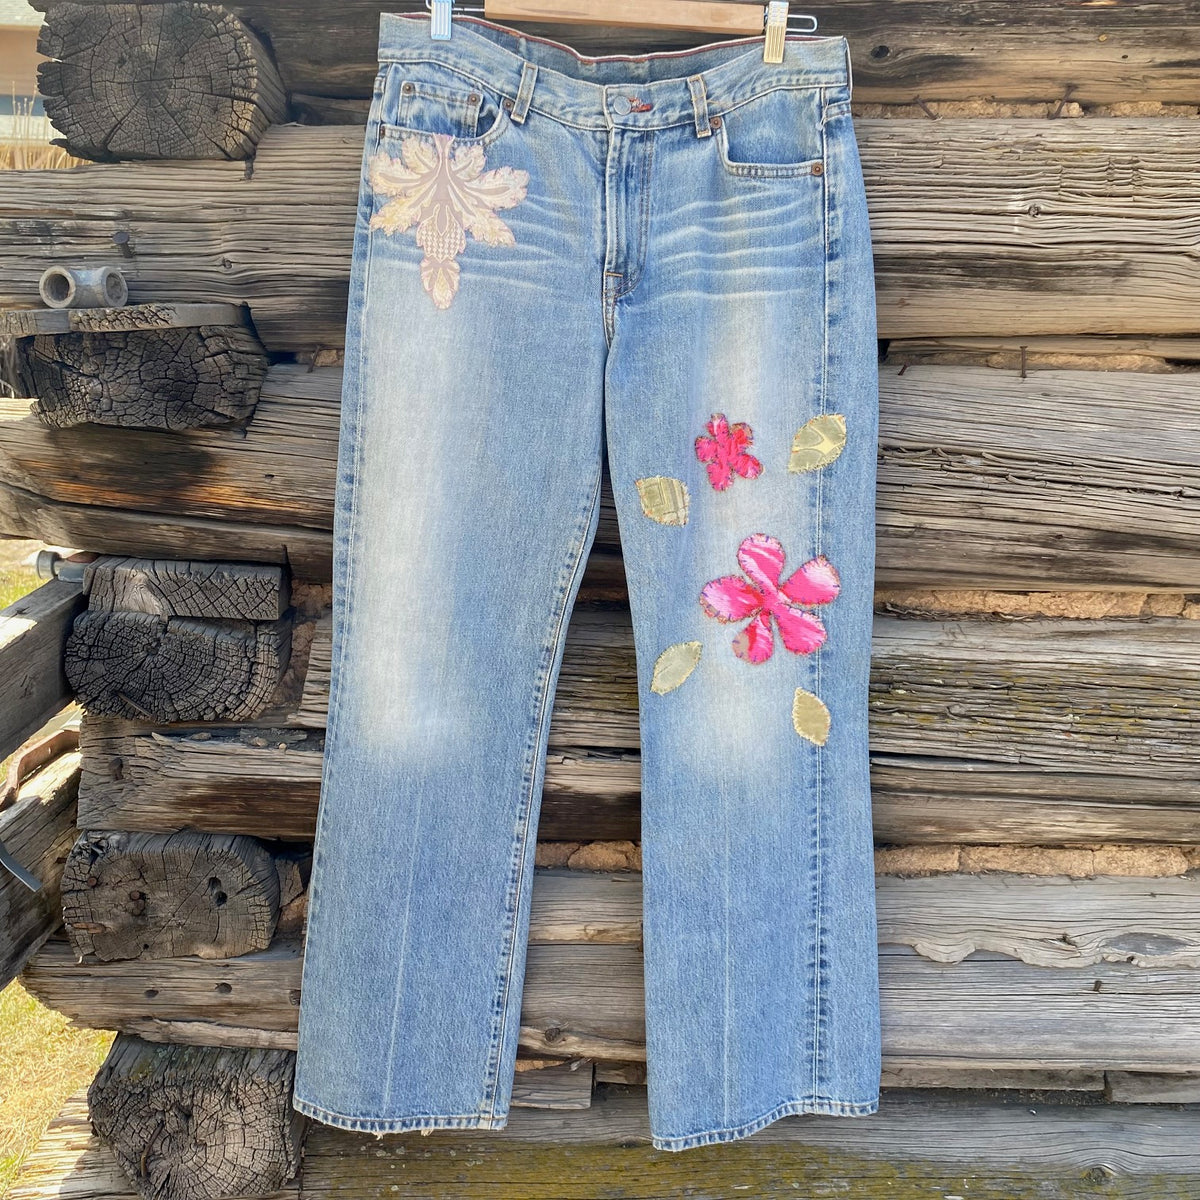 Tessa Hand Me Downs Upcycled Jeans Lucky Brand size 32 – Tessa